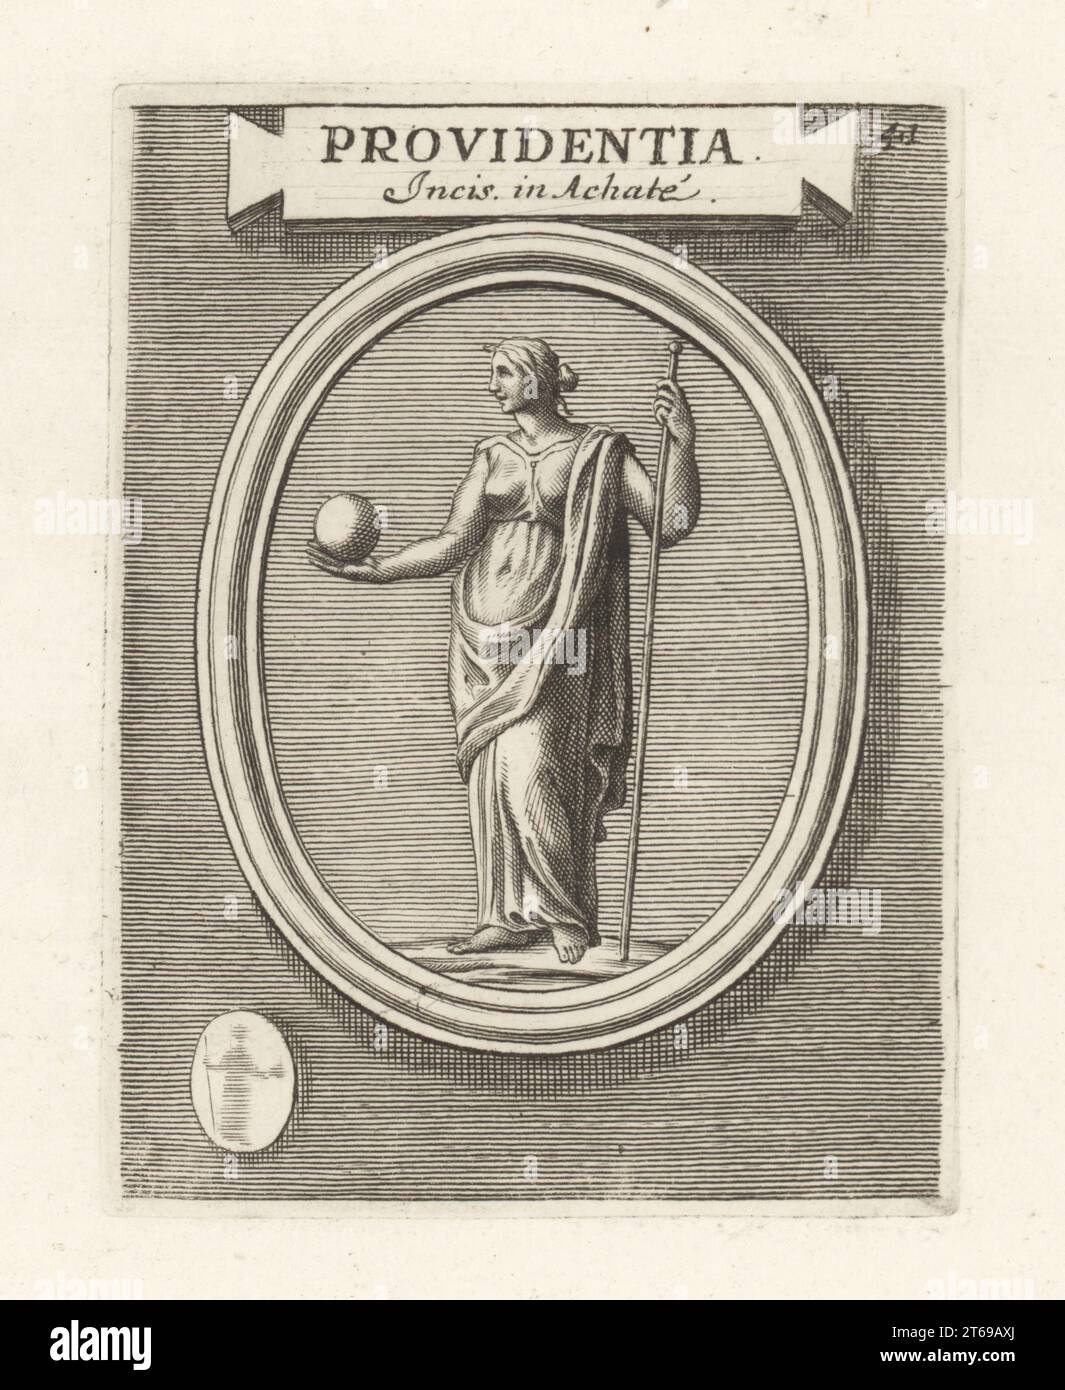 Providentia, Roman divine personification of foresight or providence, with orb and spear. From an engraved agate gem on a heretical amulet. Providentia Incis in Achate. Copperplate engraving from Francesco Valesio, Antonio Gori and Ridolfino Venutis Academia Etrusca, Museum Cortonense in quo Vetera Monumenta, (Etruscan Academy or Museum of Cortona), Faustus Amideus, Rome, 1750. Stock Photo